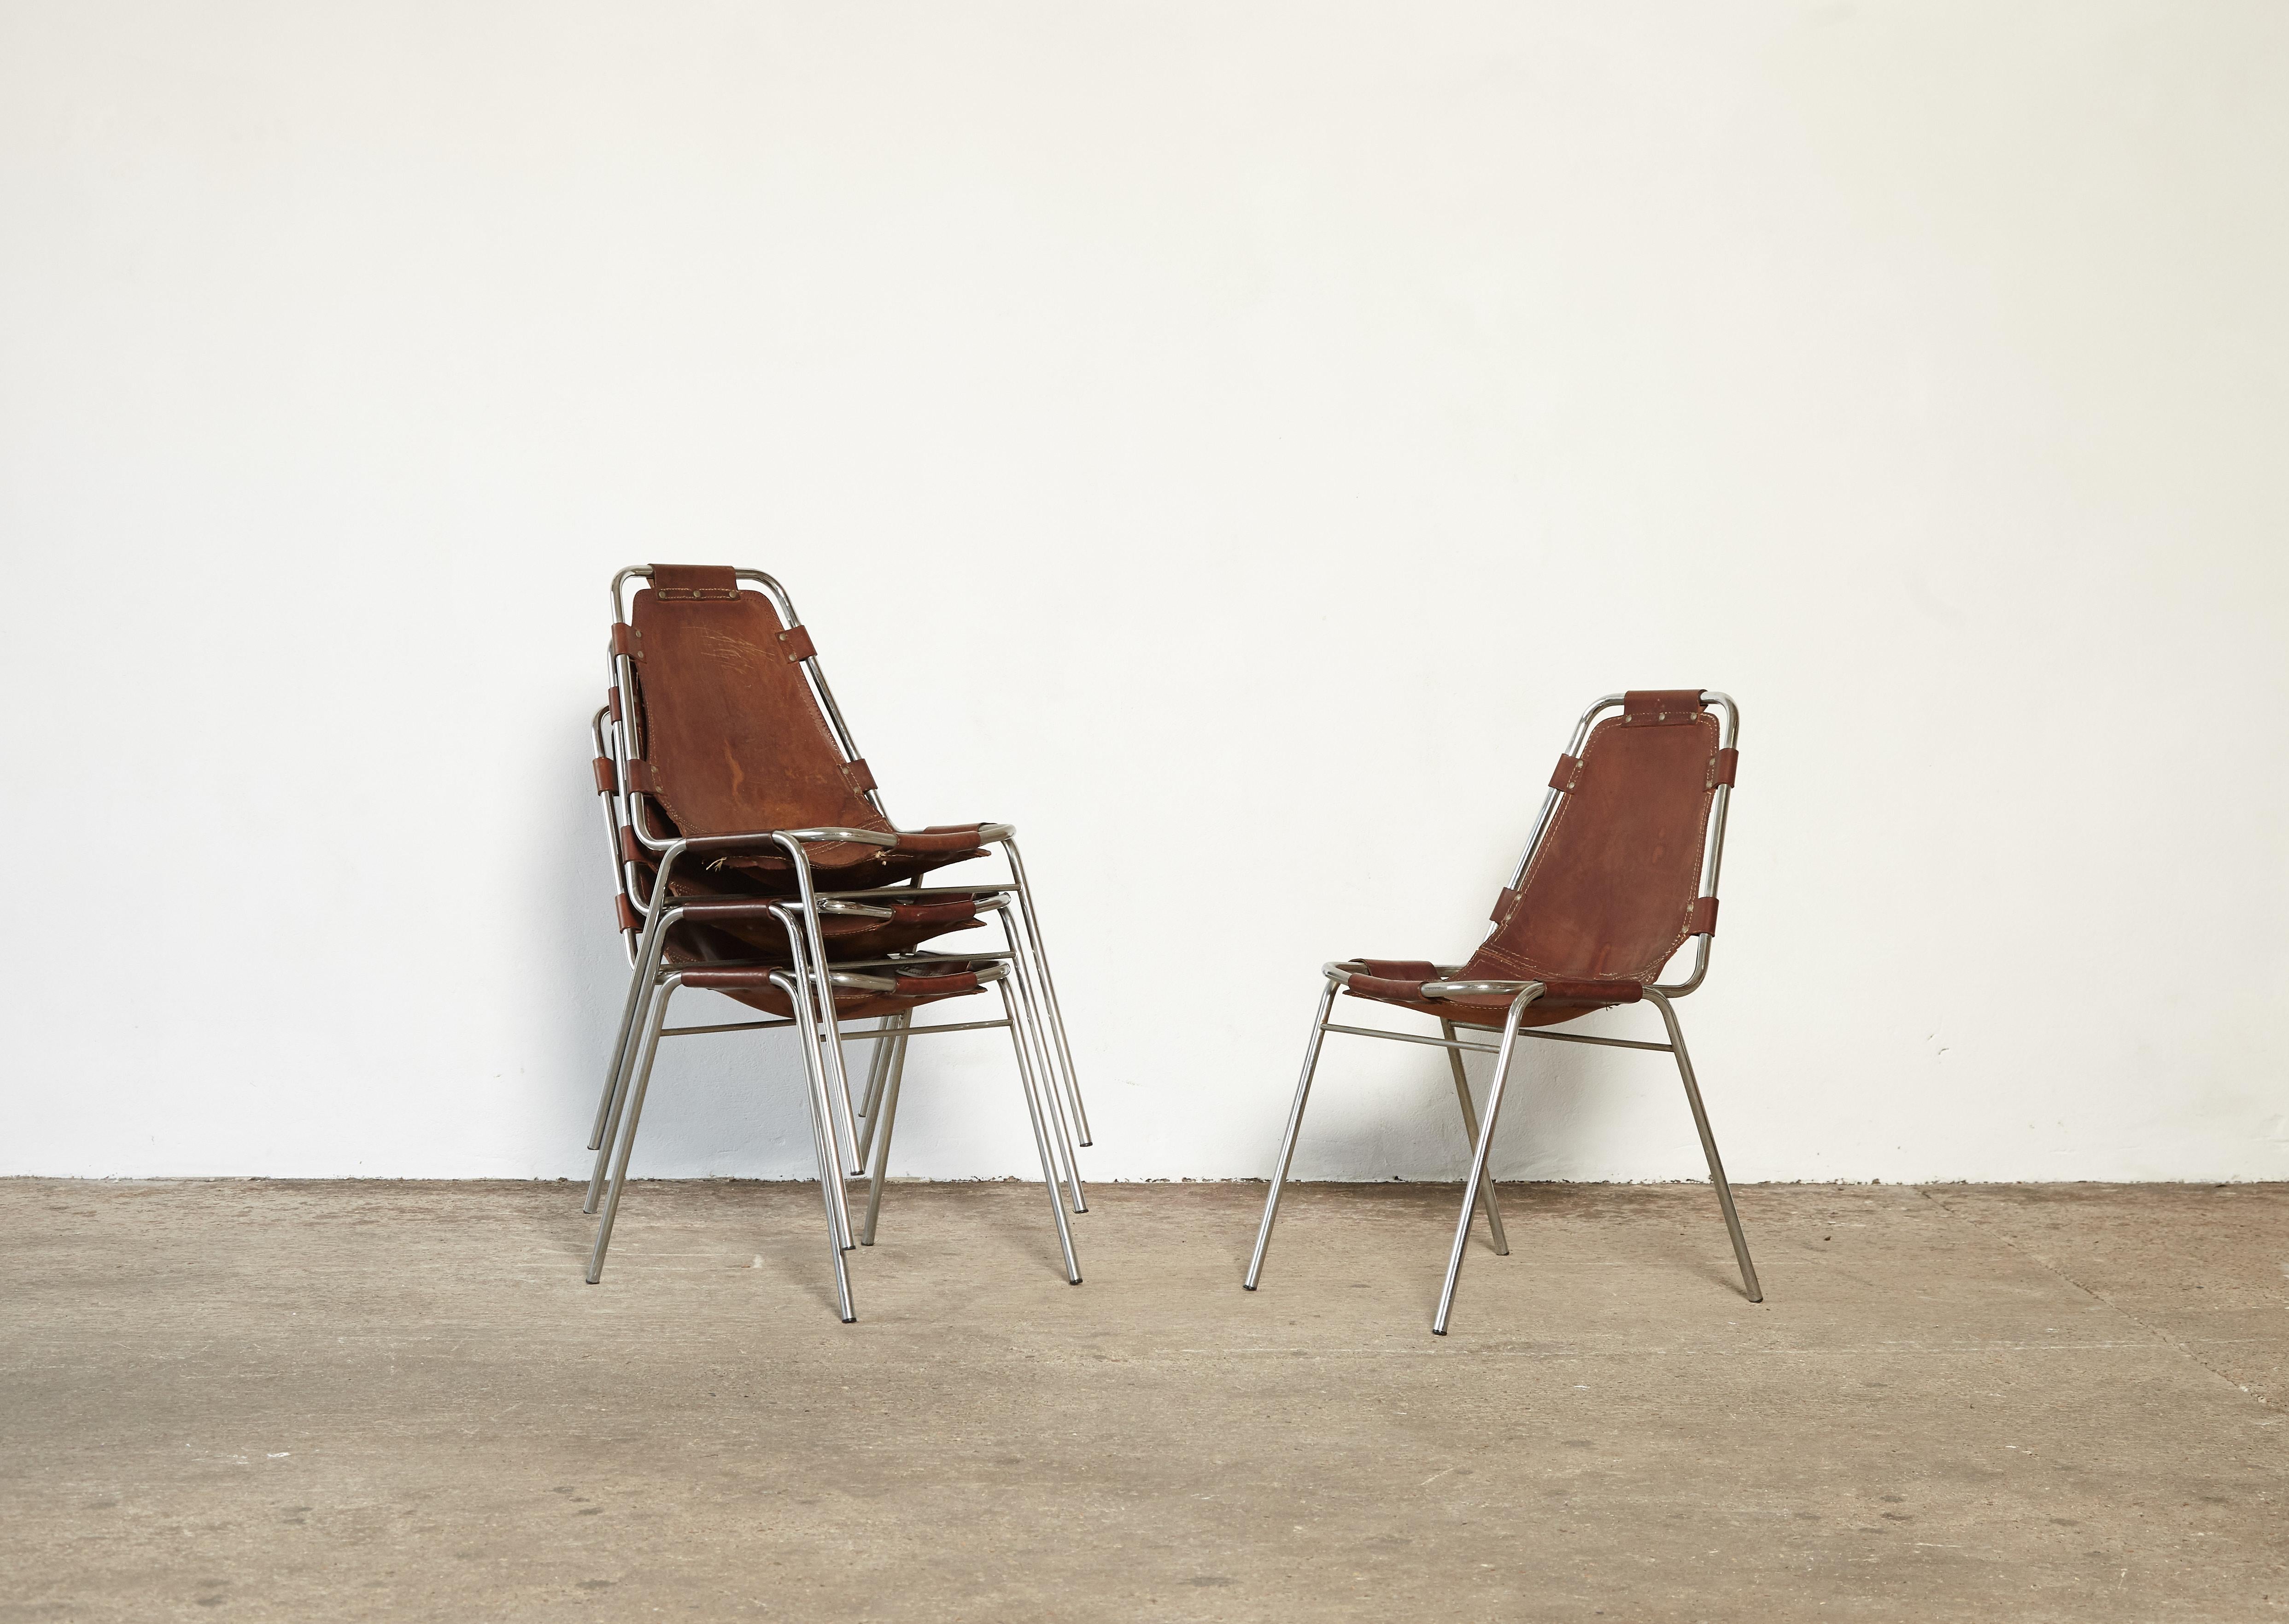 'Les Arcs' chairs in tubular steel and cognac leather, France or Italy, 1970s. Patinated original leather. Ships worldwide.

Les Arcs was a project on which Charlotte Perriand collaborated with some other architects who developed the interiors as